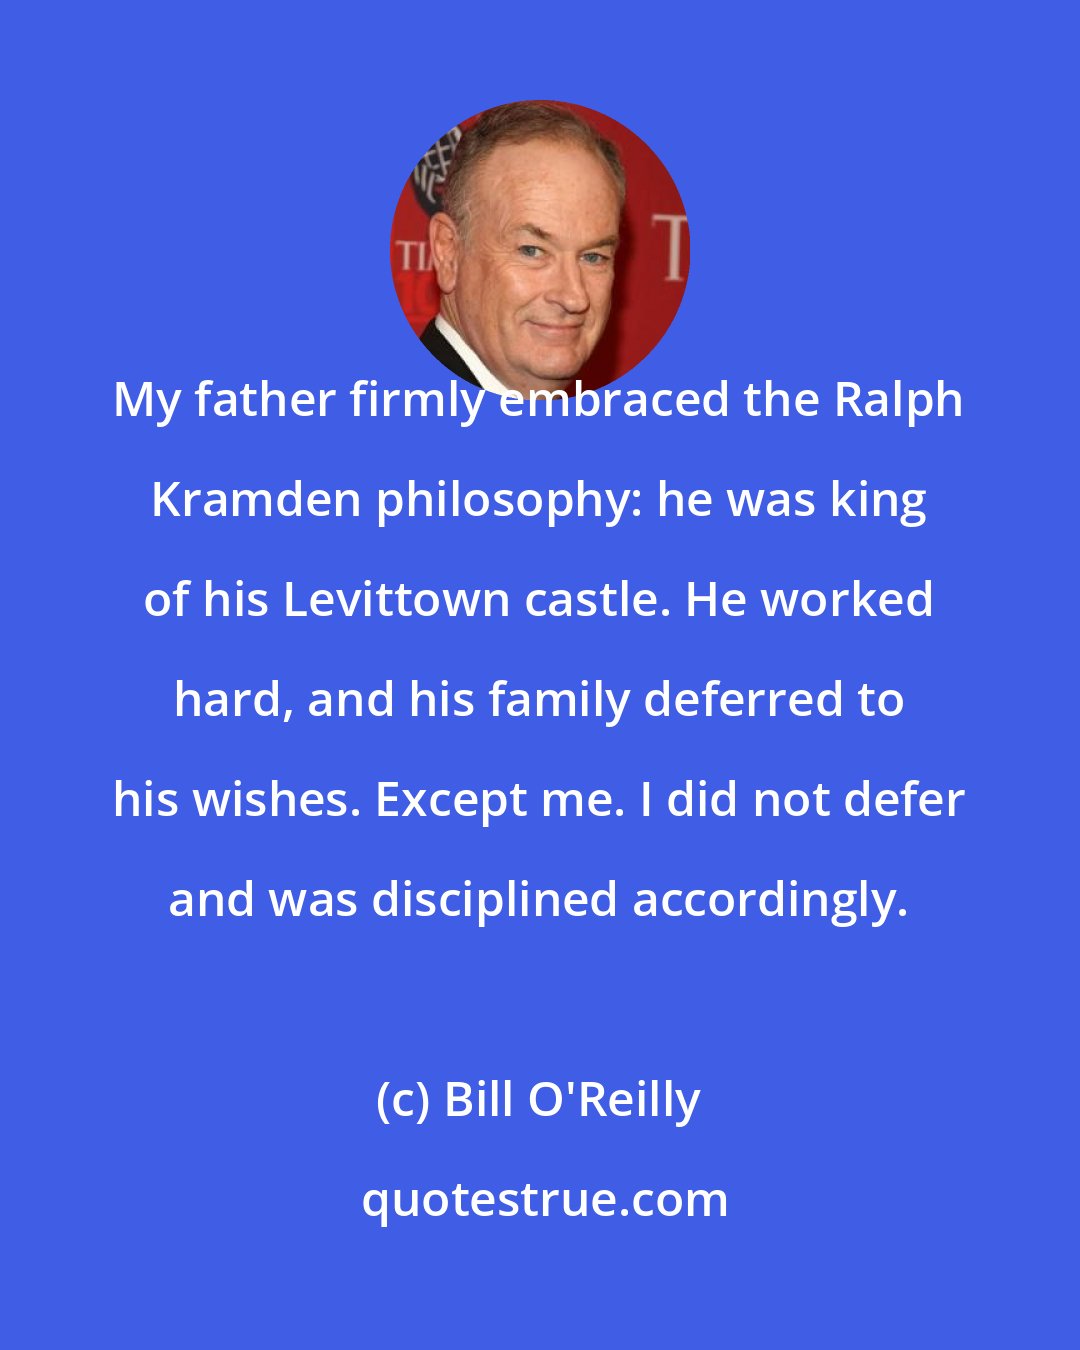 Bill O'Reilly: My father firmly embraced the Ralph Kramden philosophy: he was king of his Levittown castle. He worked hard, and his family deferred to his wishes. Except me. I did not defer and was disciplined accordingly.